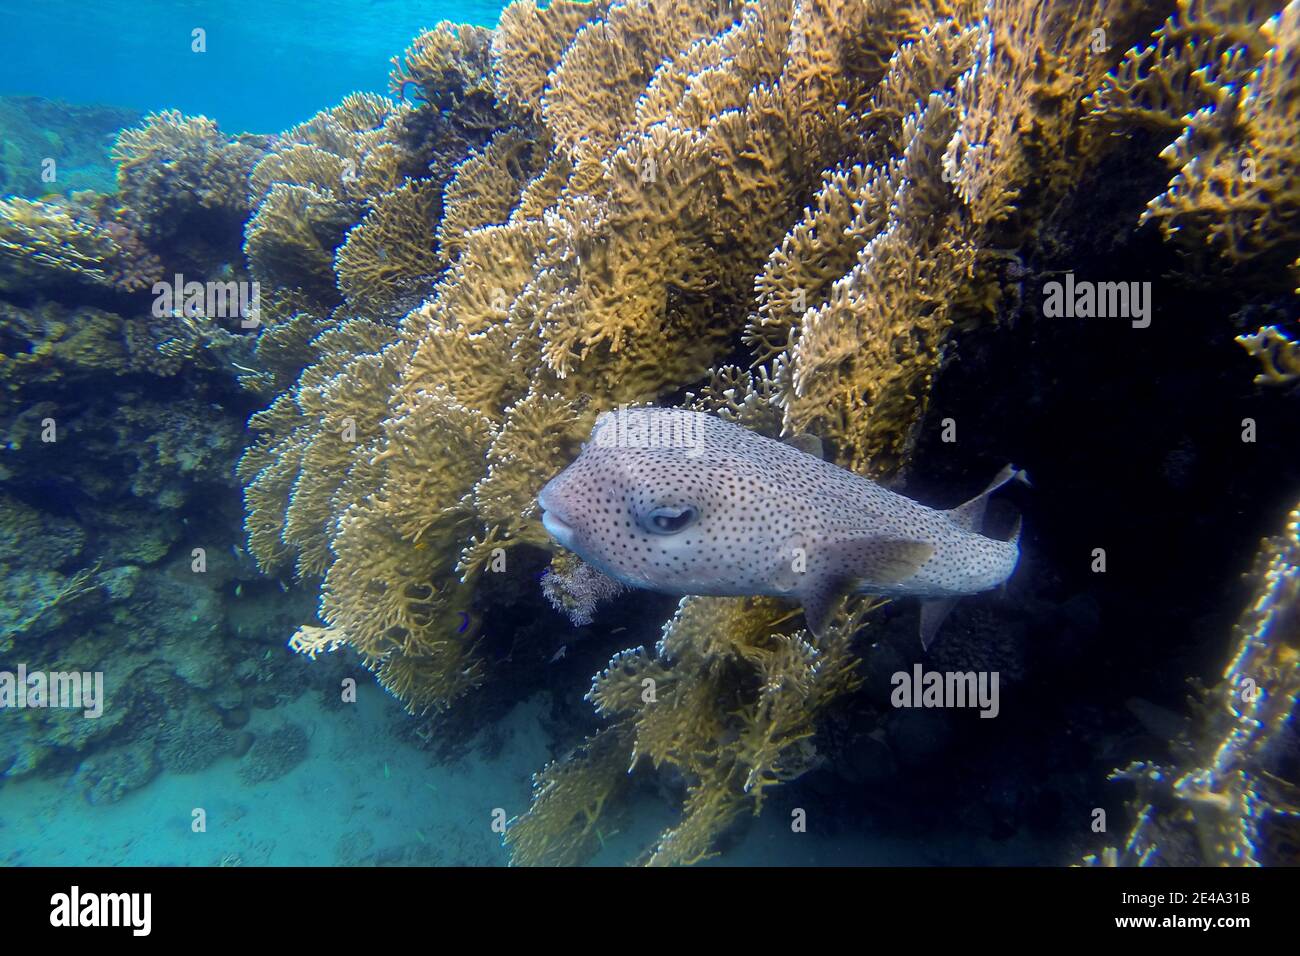 large Hedgehog Fish in the sea looks Stock Photo